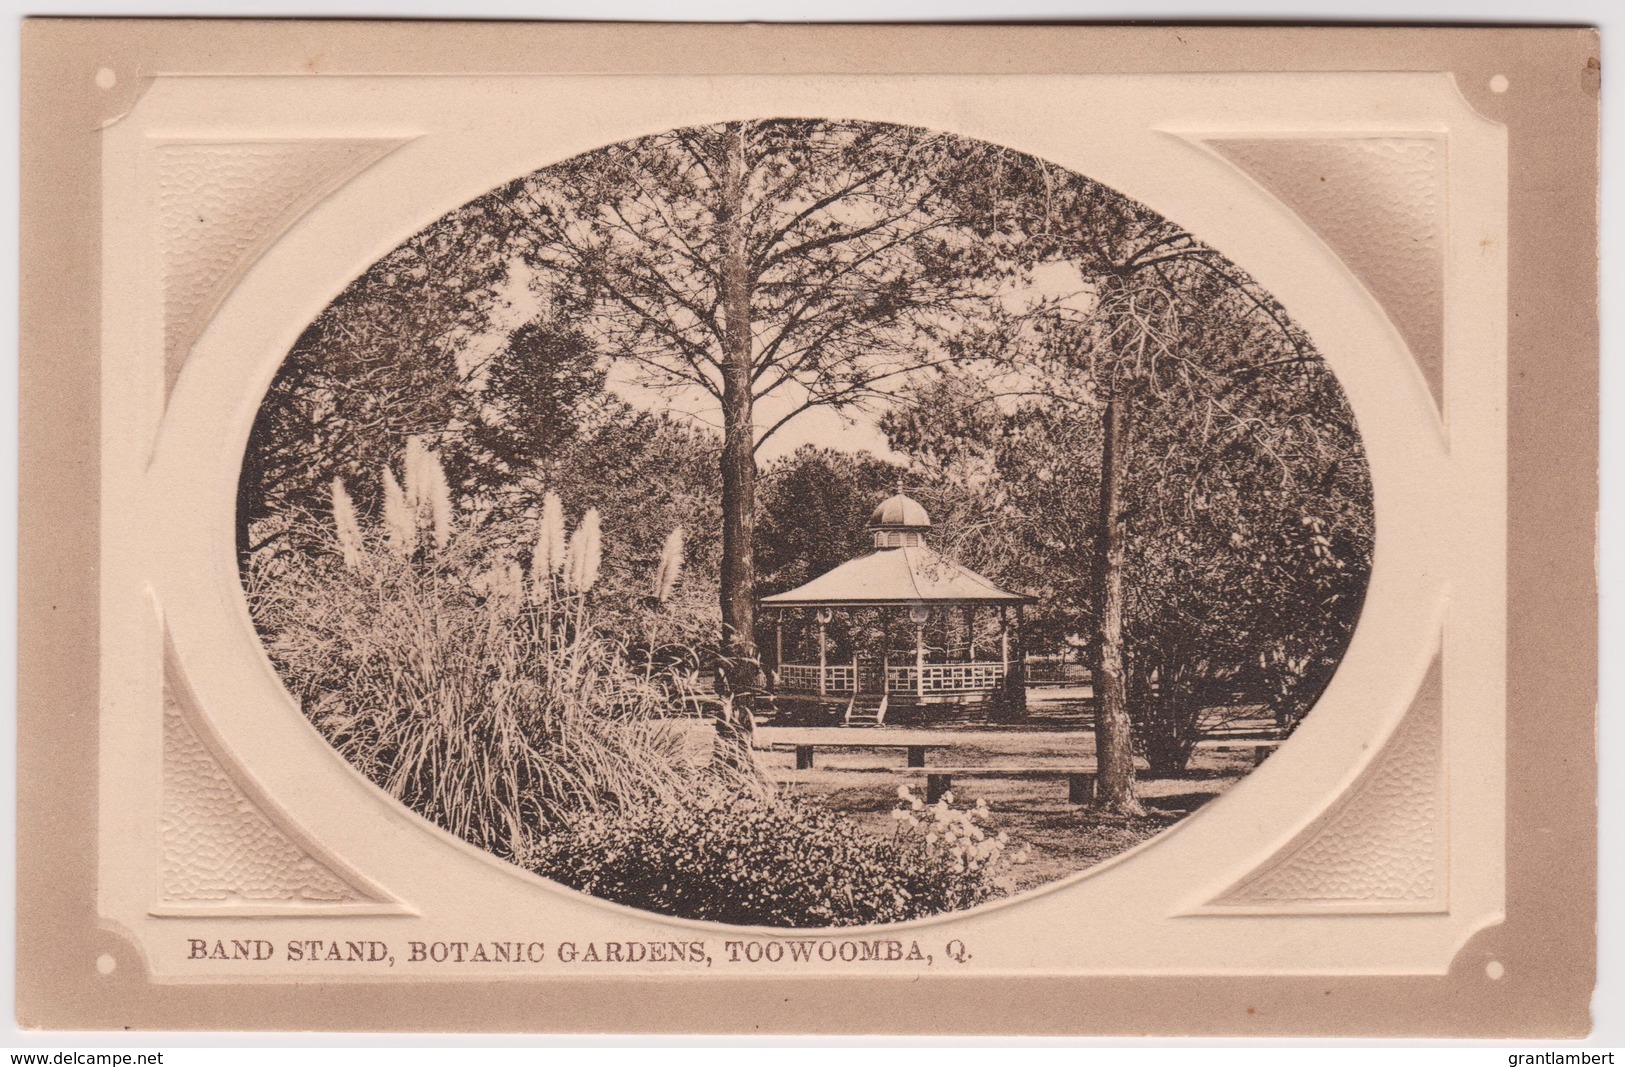 Band Stand, Botanic Gardens, Toowoomba, Queensland - Vintage Card About 1910, Unused - Towoomba / Darling Downs